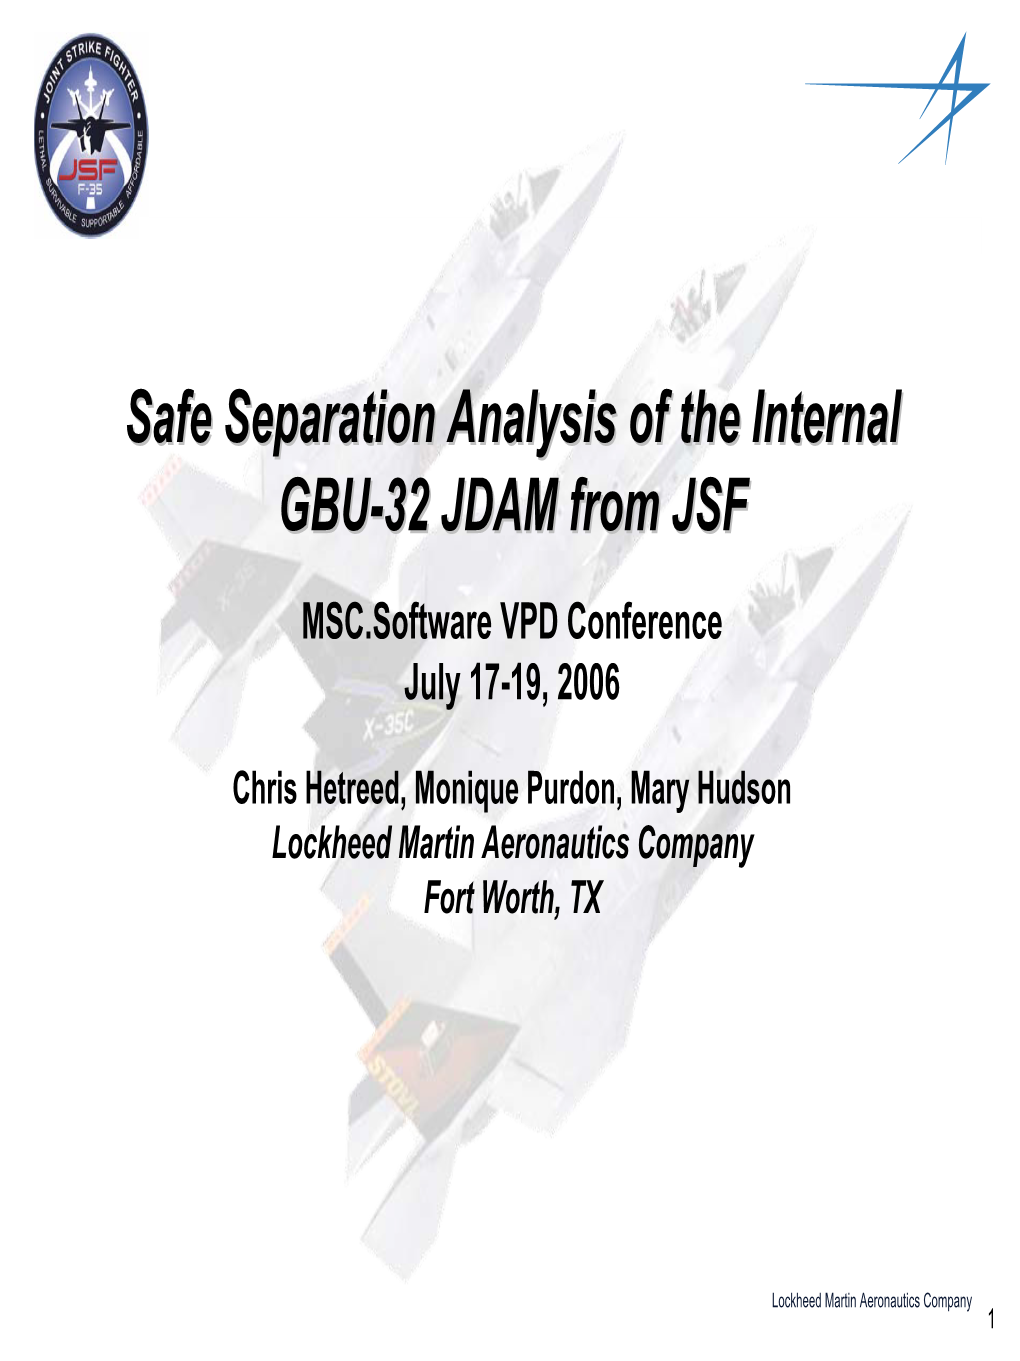 JSF Store Separation Analysis